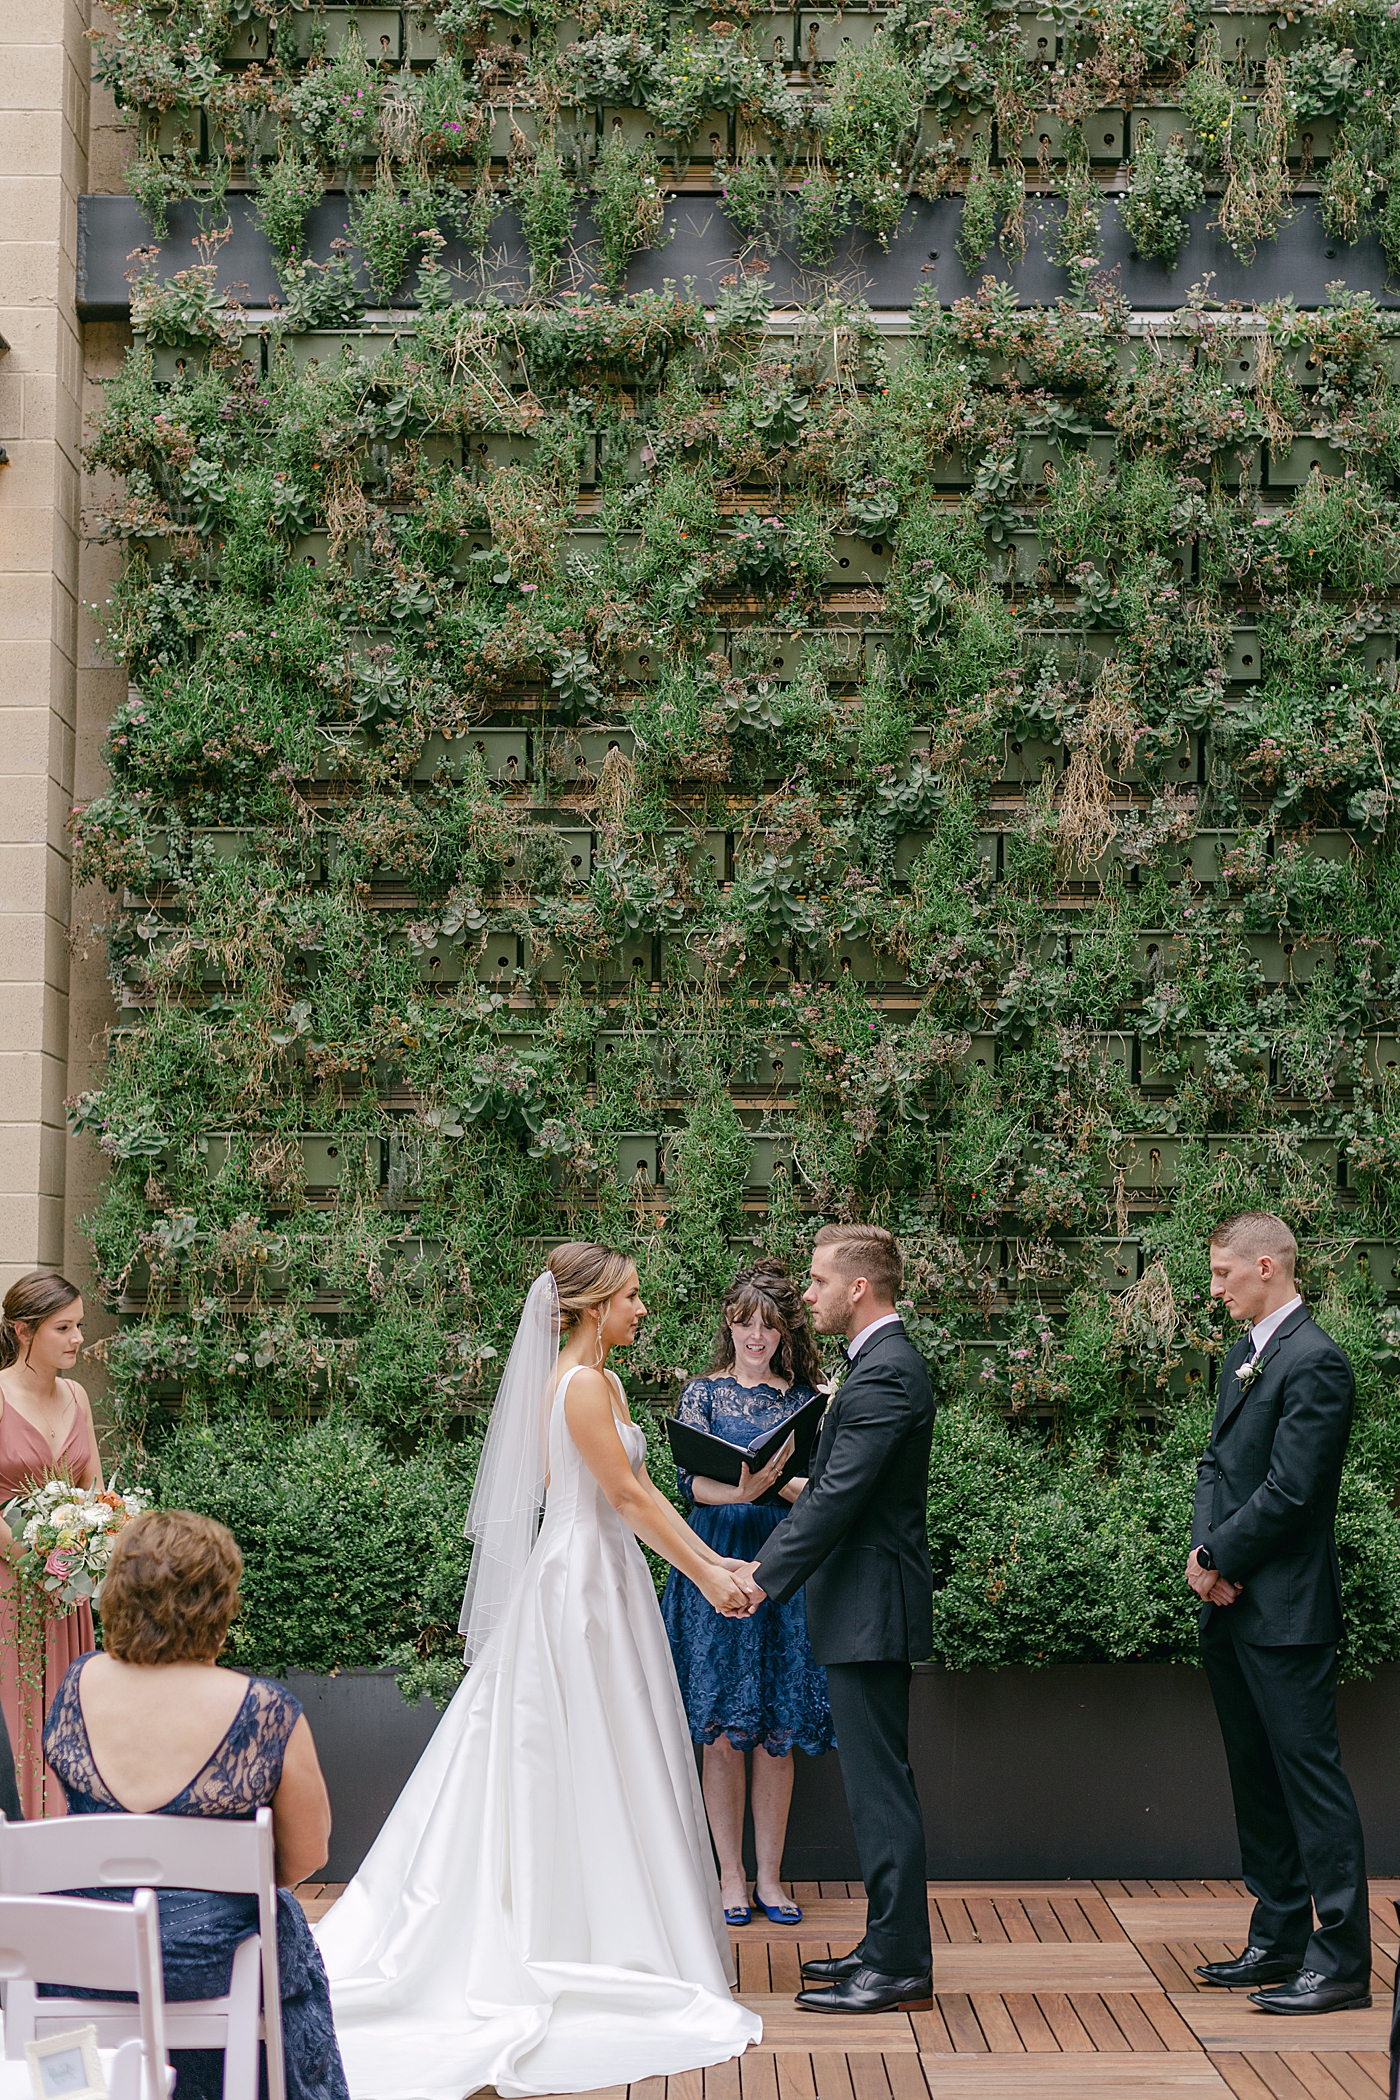 Bride and groom exchanging their vows | Excelsior PA Wedding Photography by Hope Helmuth Photography